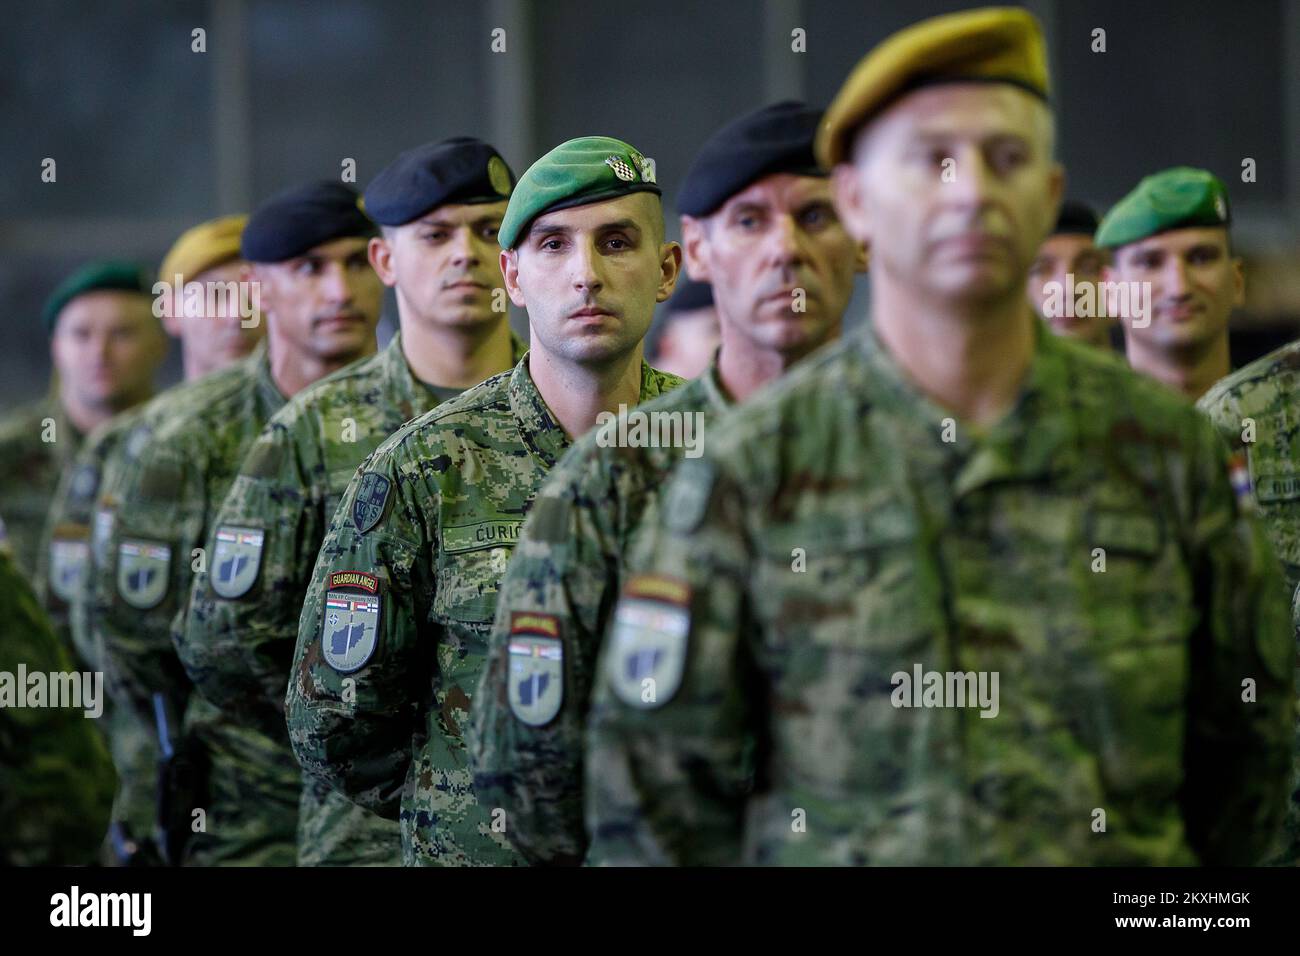 Ceremonial reception of the 12th Croatian contingent from the Resolute Support peacekeeping mission in Afghanistan was held at Pleso airport in the barracks of the 91st Wing of the Croatian Air Force in Zagreb, Croatia on 15. September, 2020. Photo: Davor Puklavec/PIXSELL  Stock Photo